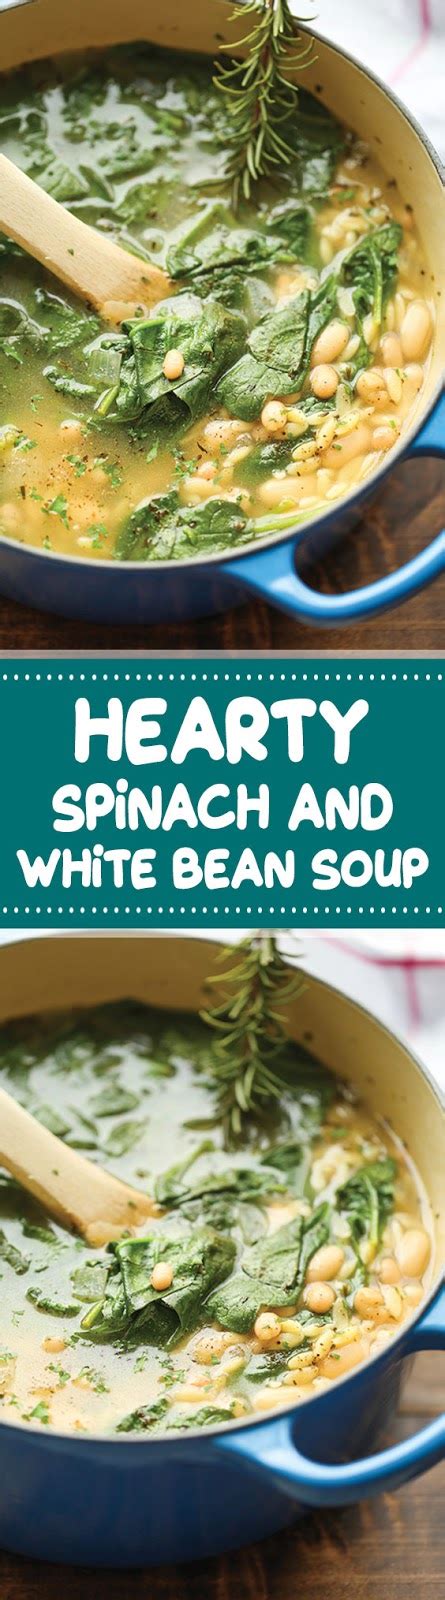 Hearty Spinach and White Bean Soup - FAMOUS RECIPES